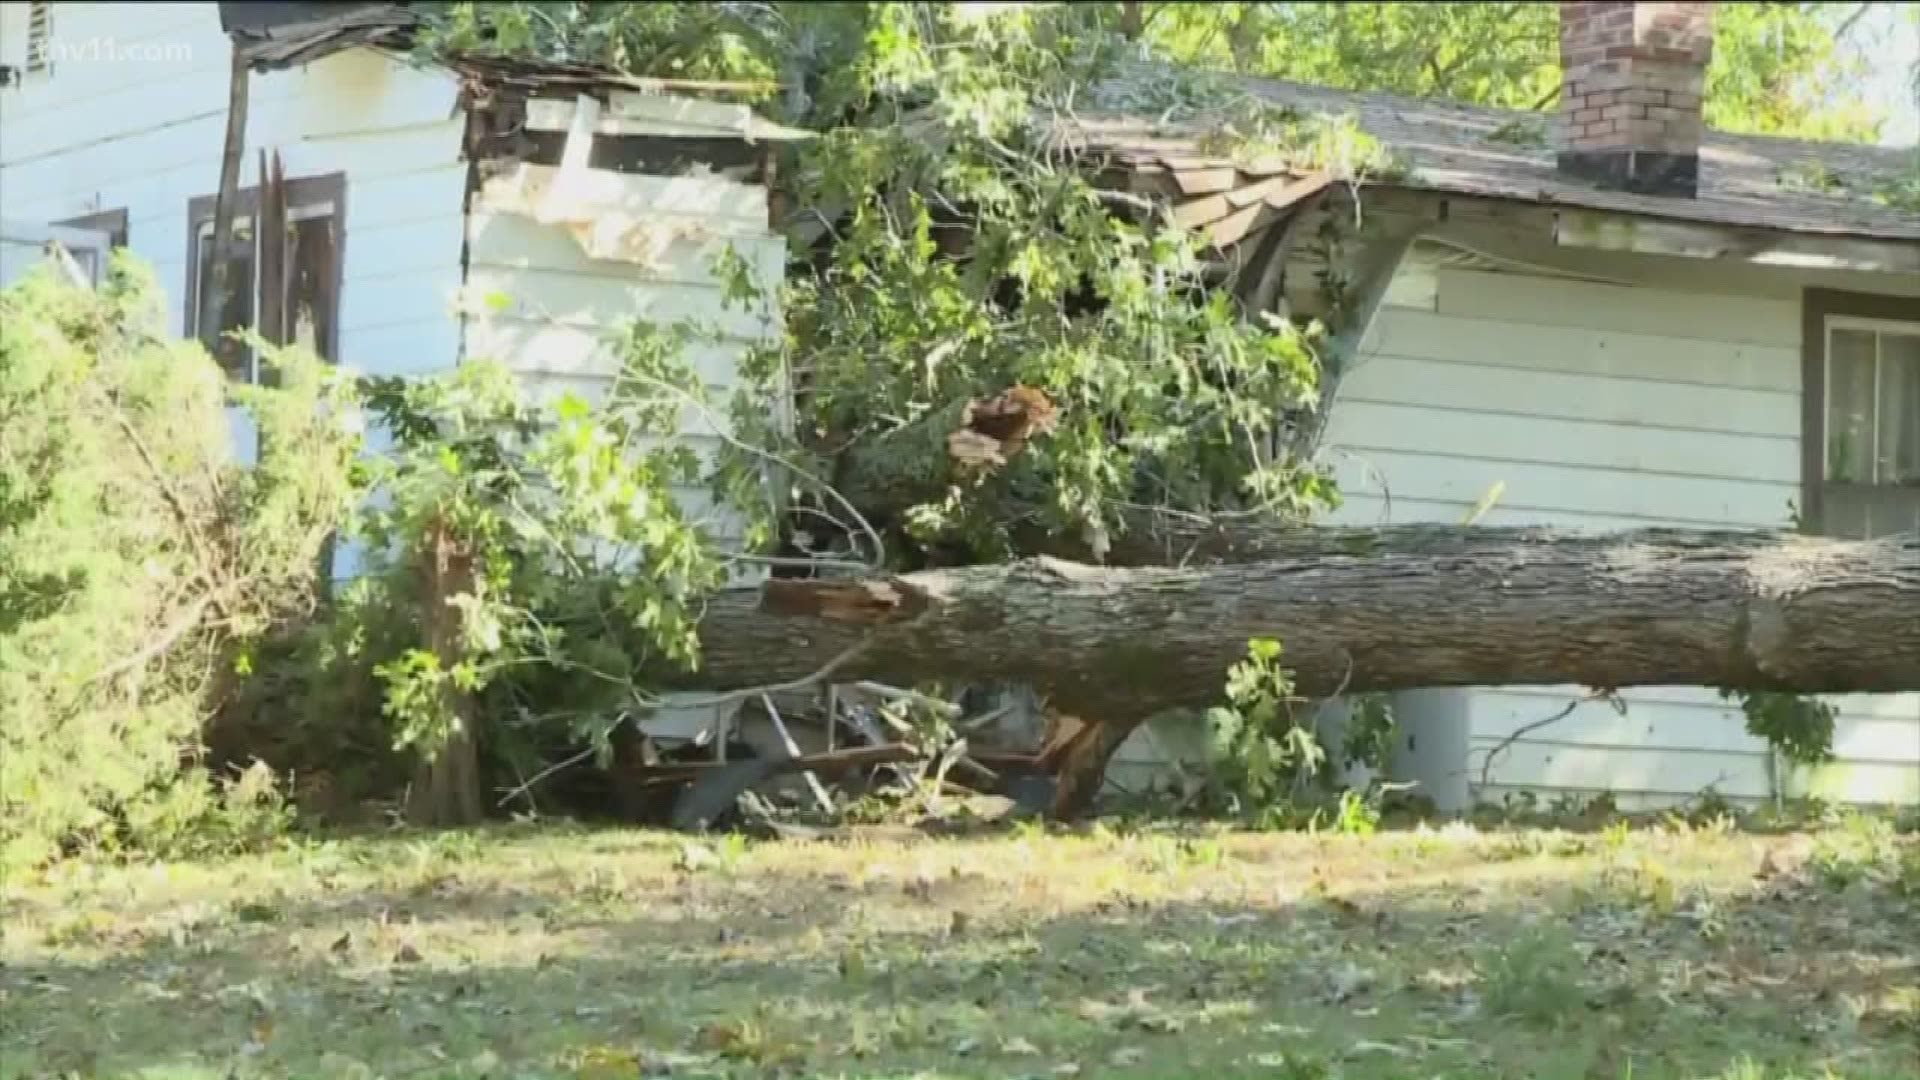 In northwest Arkansas, one man is dead after Sunday night's storms. The National Weather Service confirmed an EF-1 touched down in northwest Arkansas.